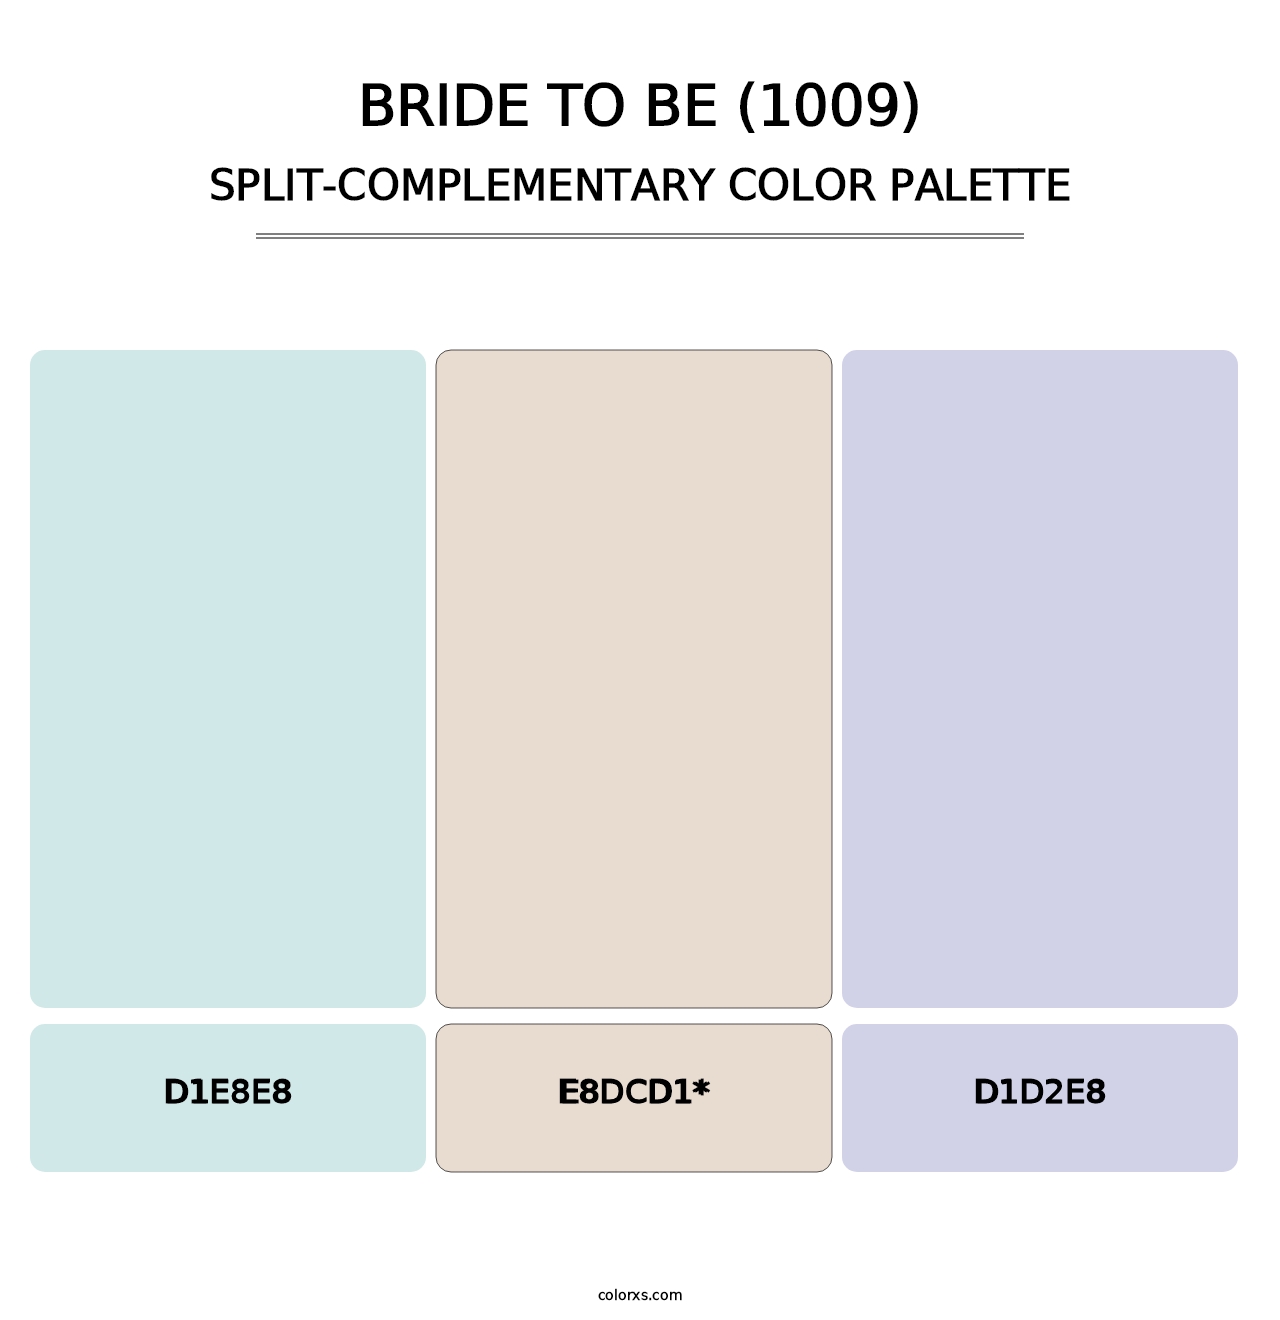 Bride To Be (1009) - Split-Complementary Color Palette